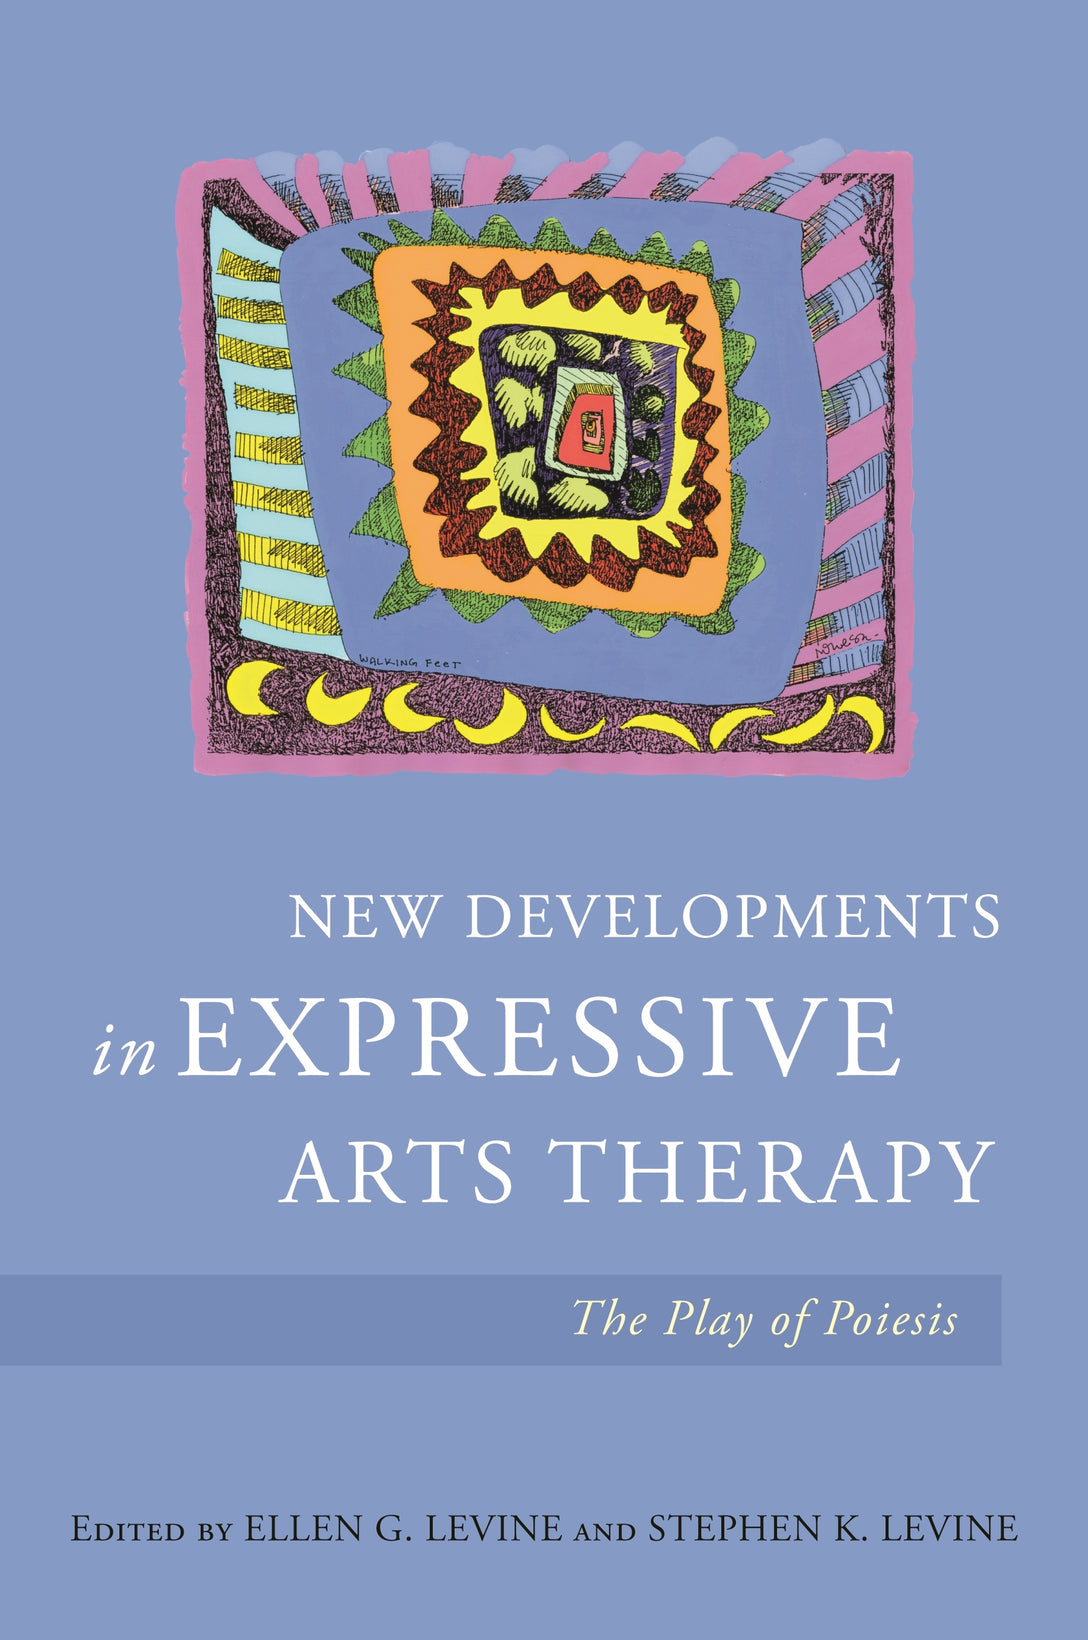 New Developments in Expressive Arts Therapy by Stephen K. Levine, Ellen G. Levine, No Author Listed